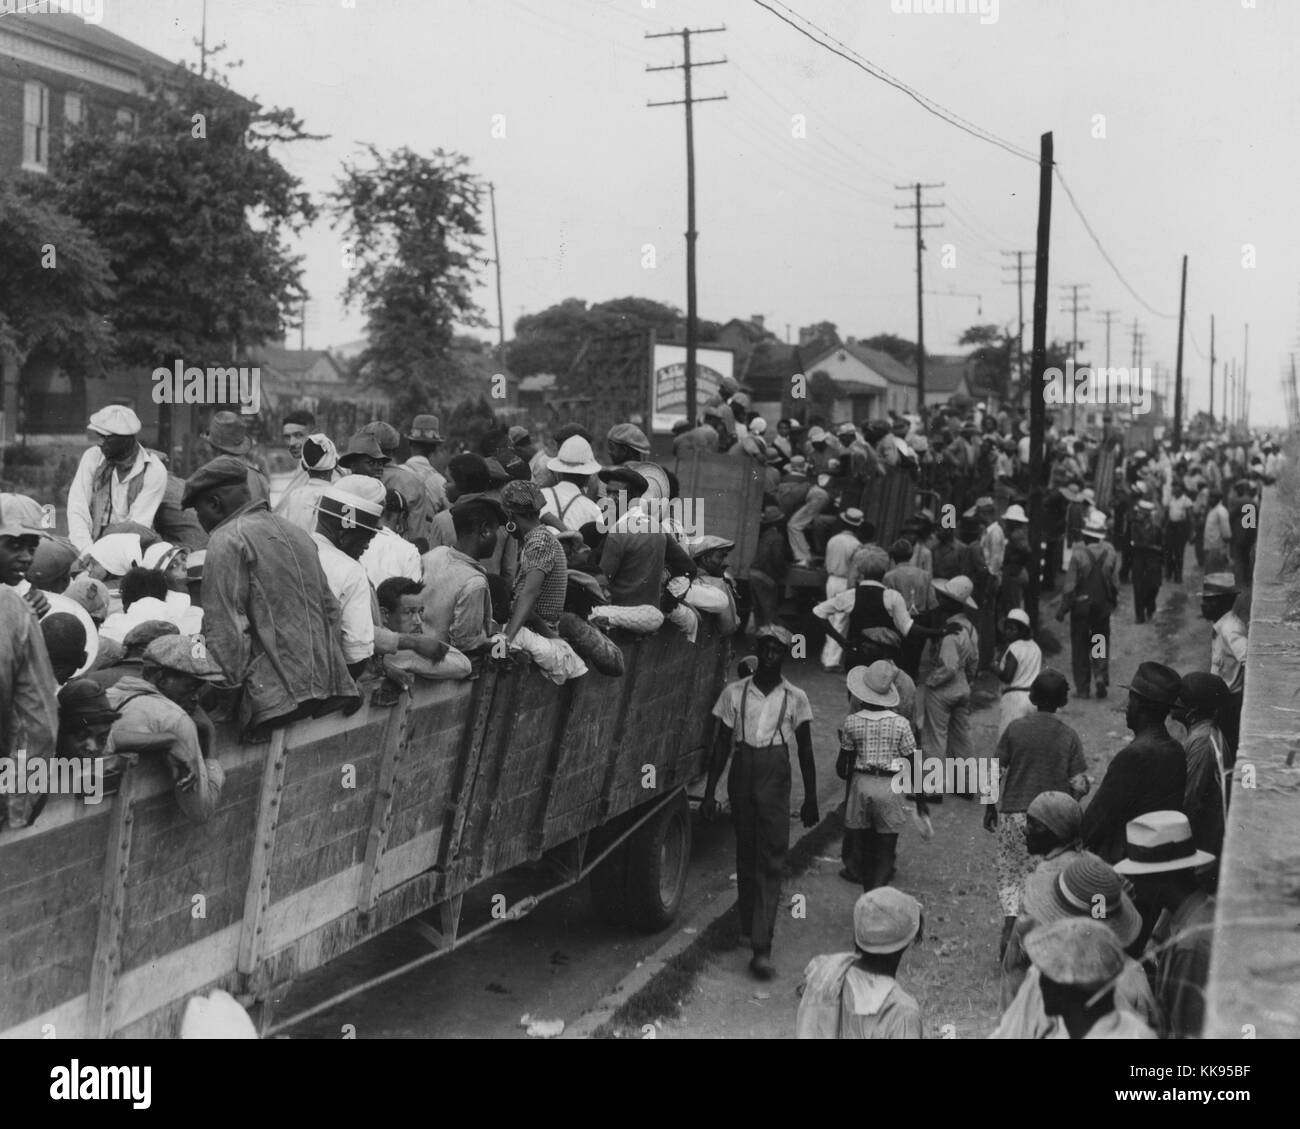 Black and white photograph of a large group of cotton hoers loading into open wagons at Memphis for the day's work in Arkansas, June, 1937. From the New York Public Library. Stock Photo